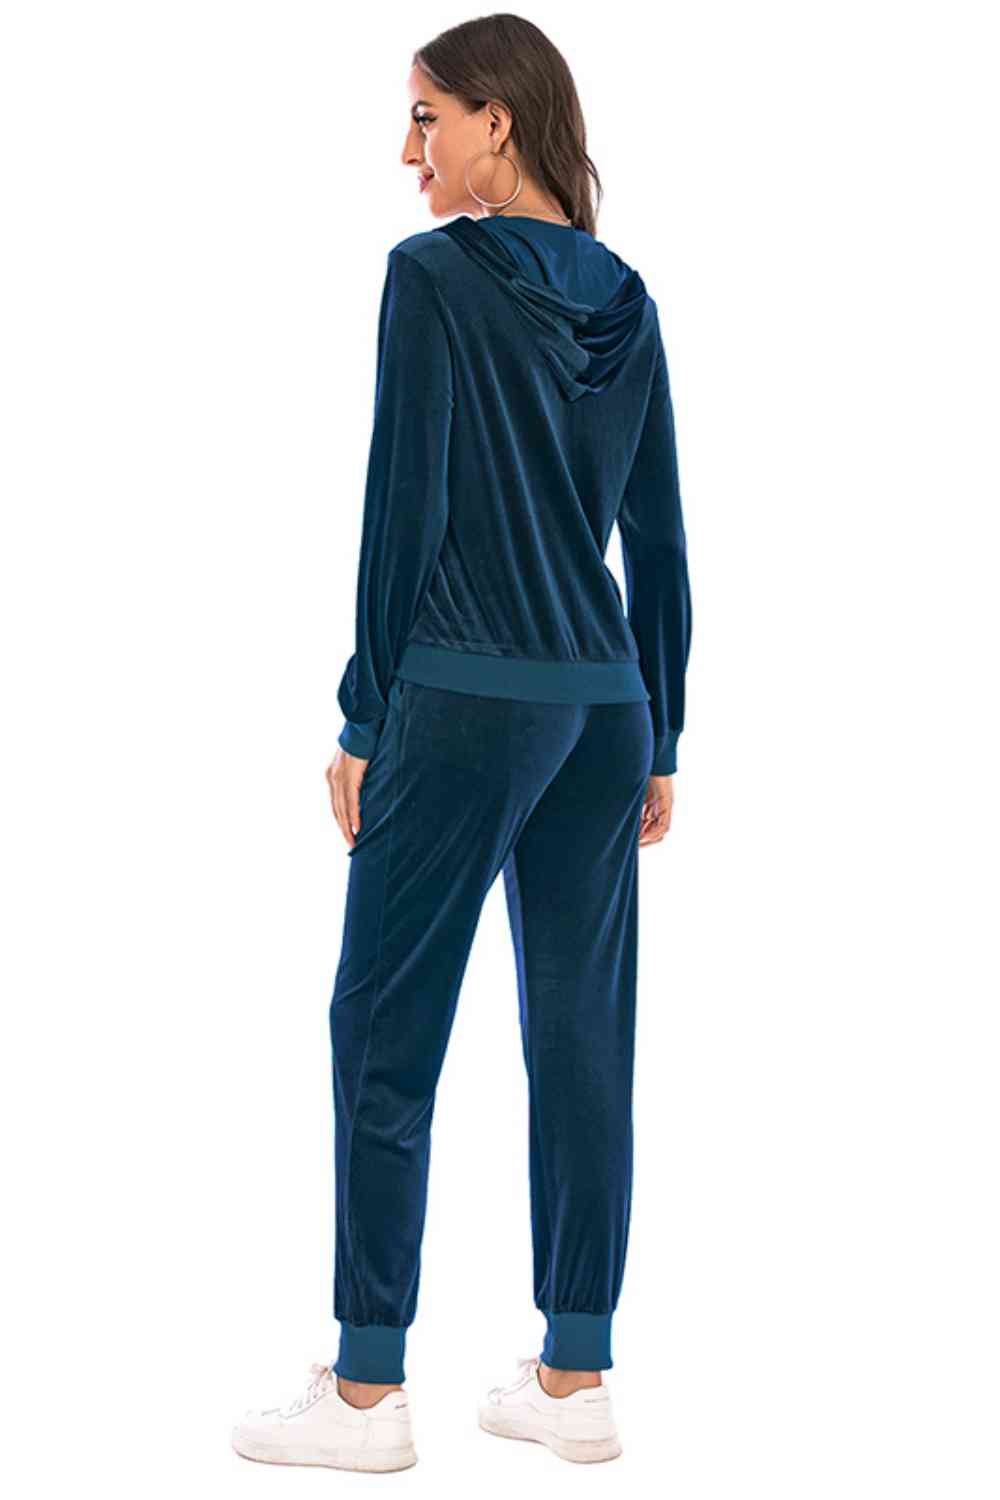 Hooded and Pants Set for Ladies